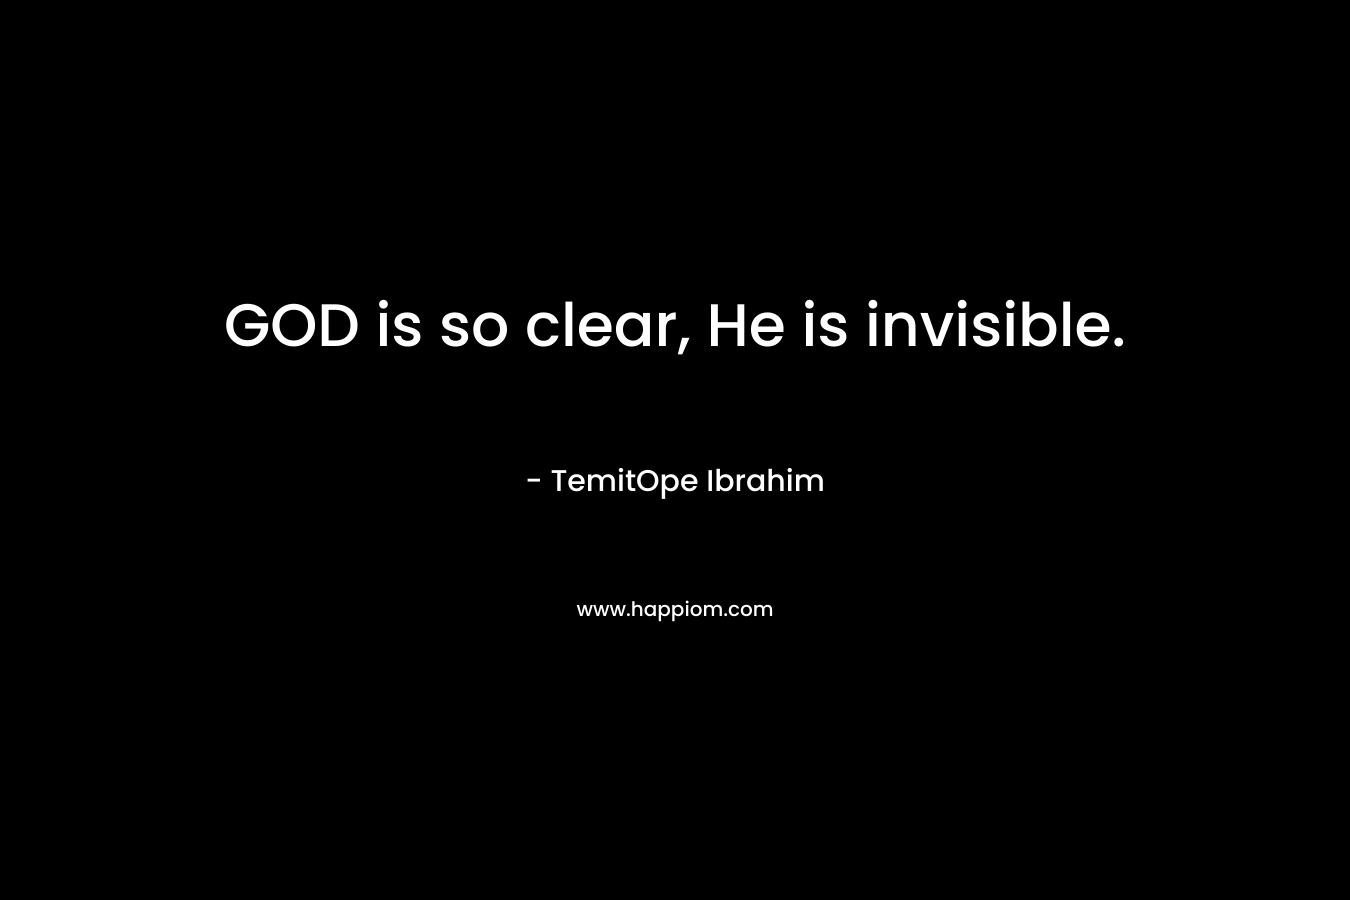 GOD is so clear, He is invisible.